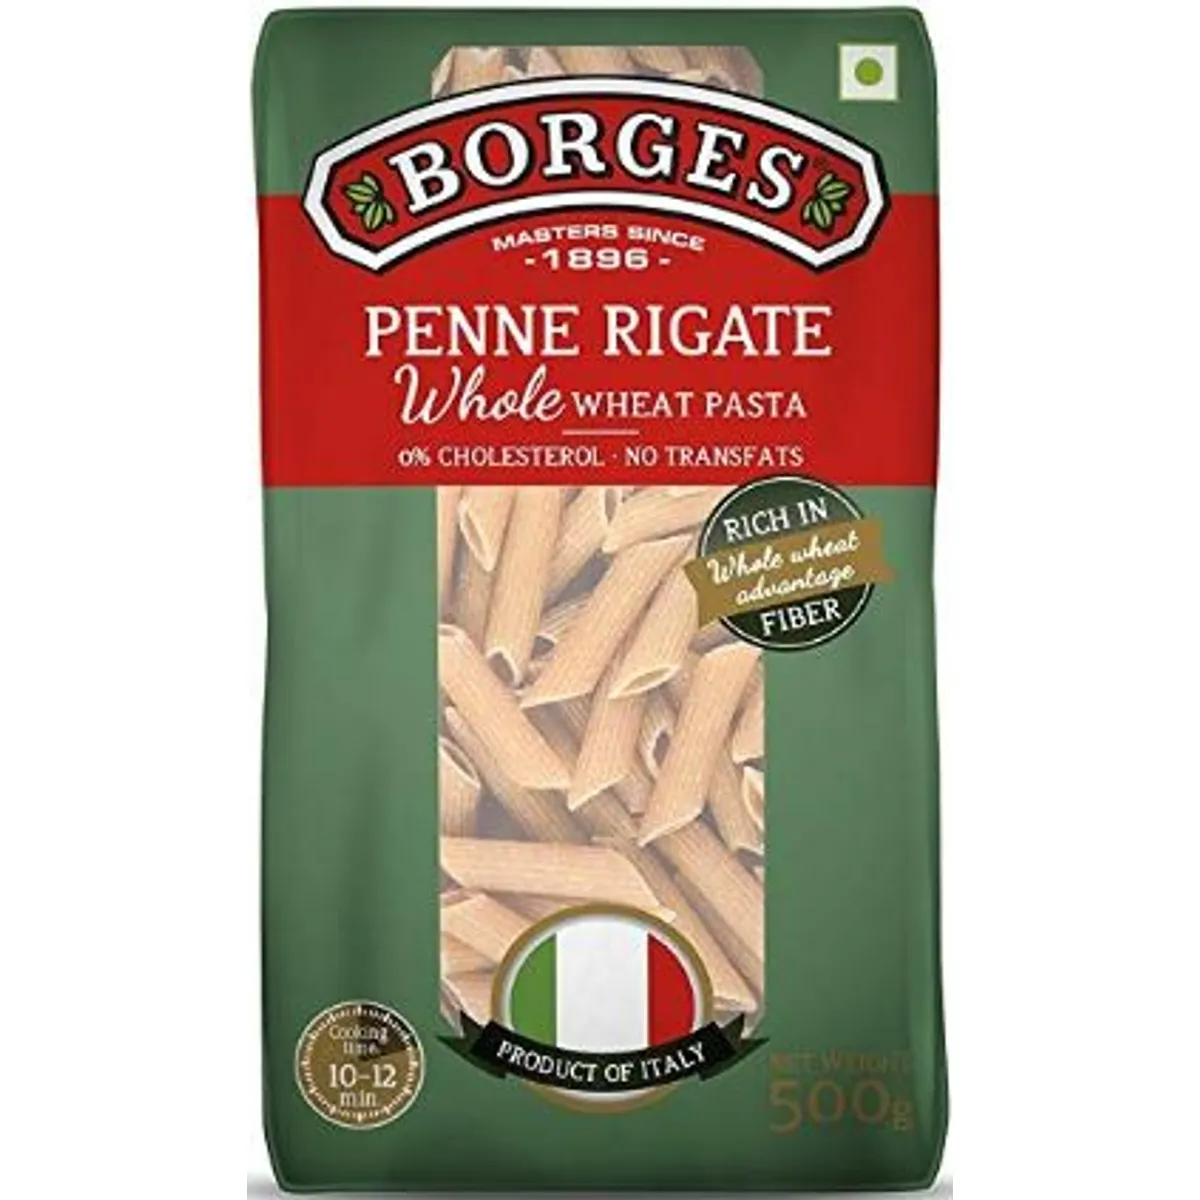 Borges Whole Wheat Penne Pasta (BUY 1 GET 1)